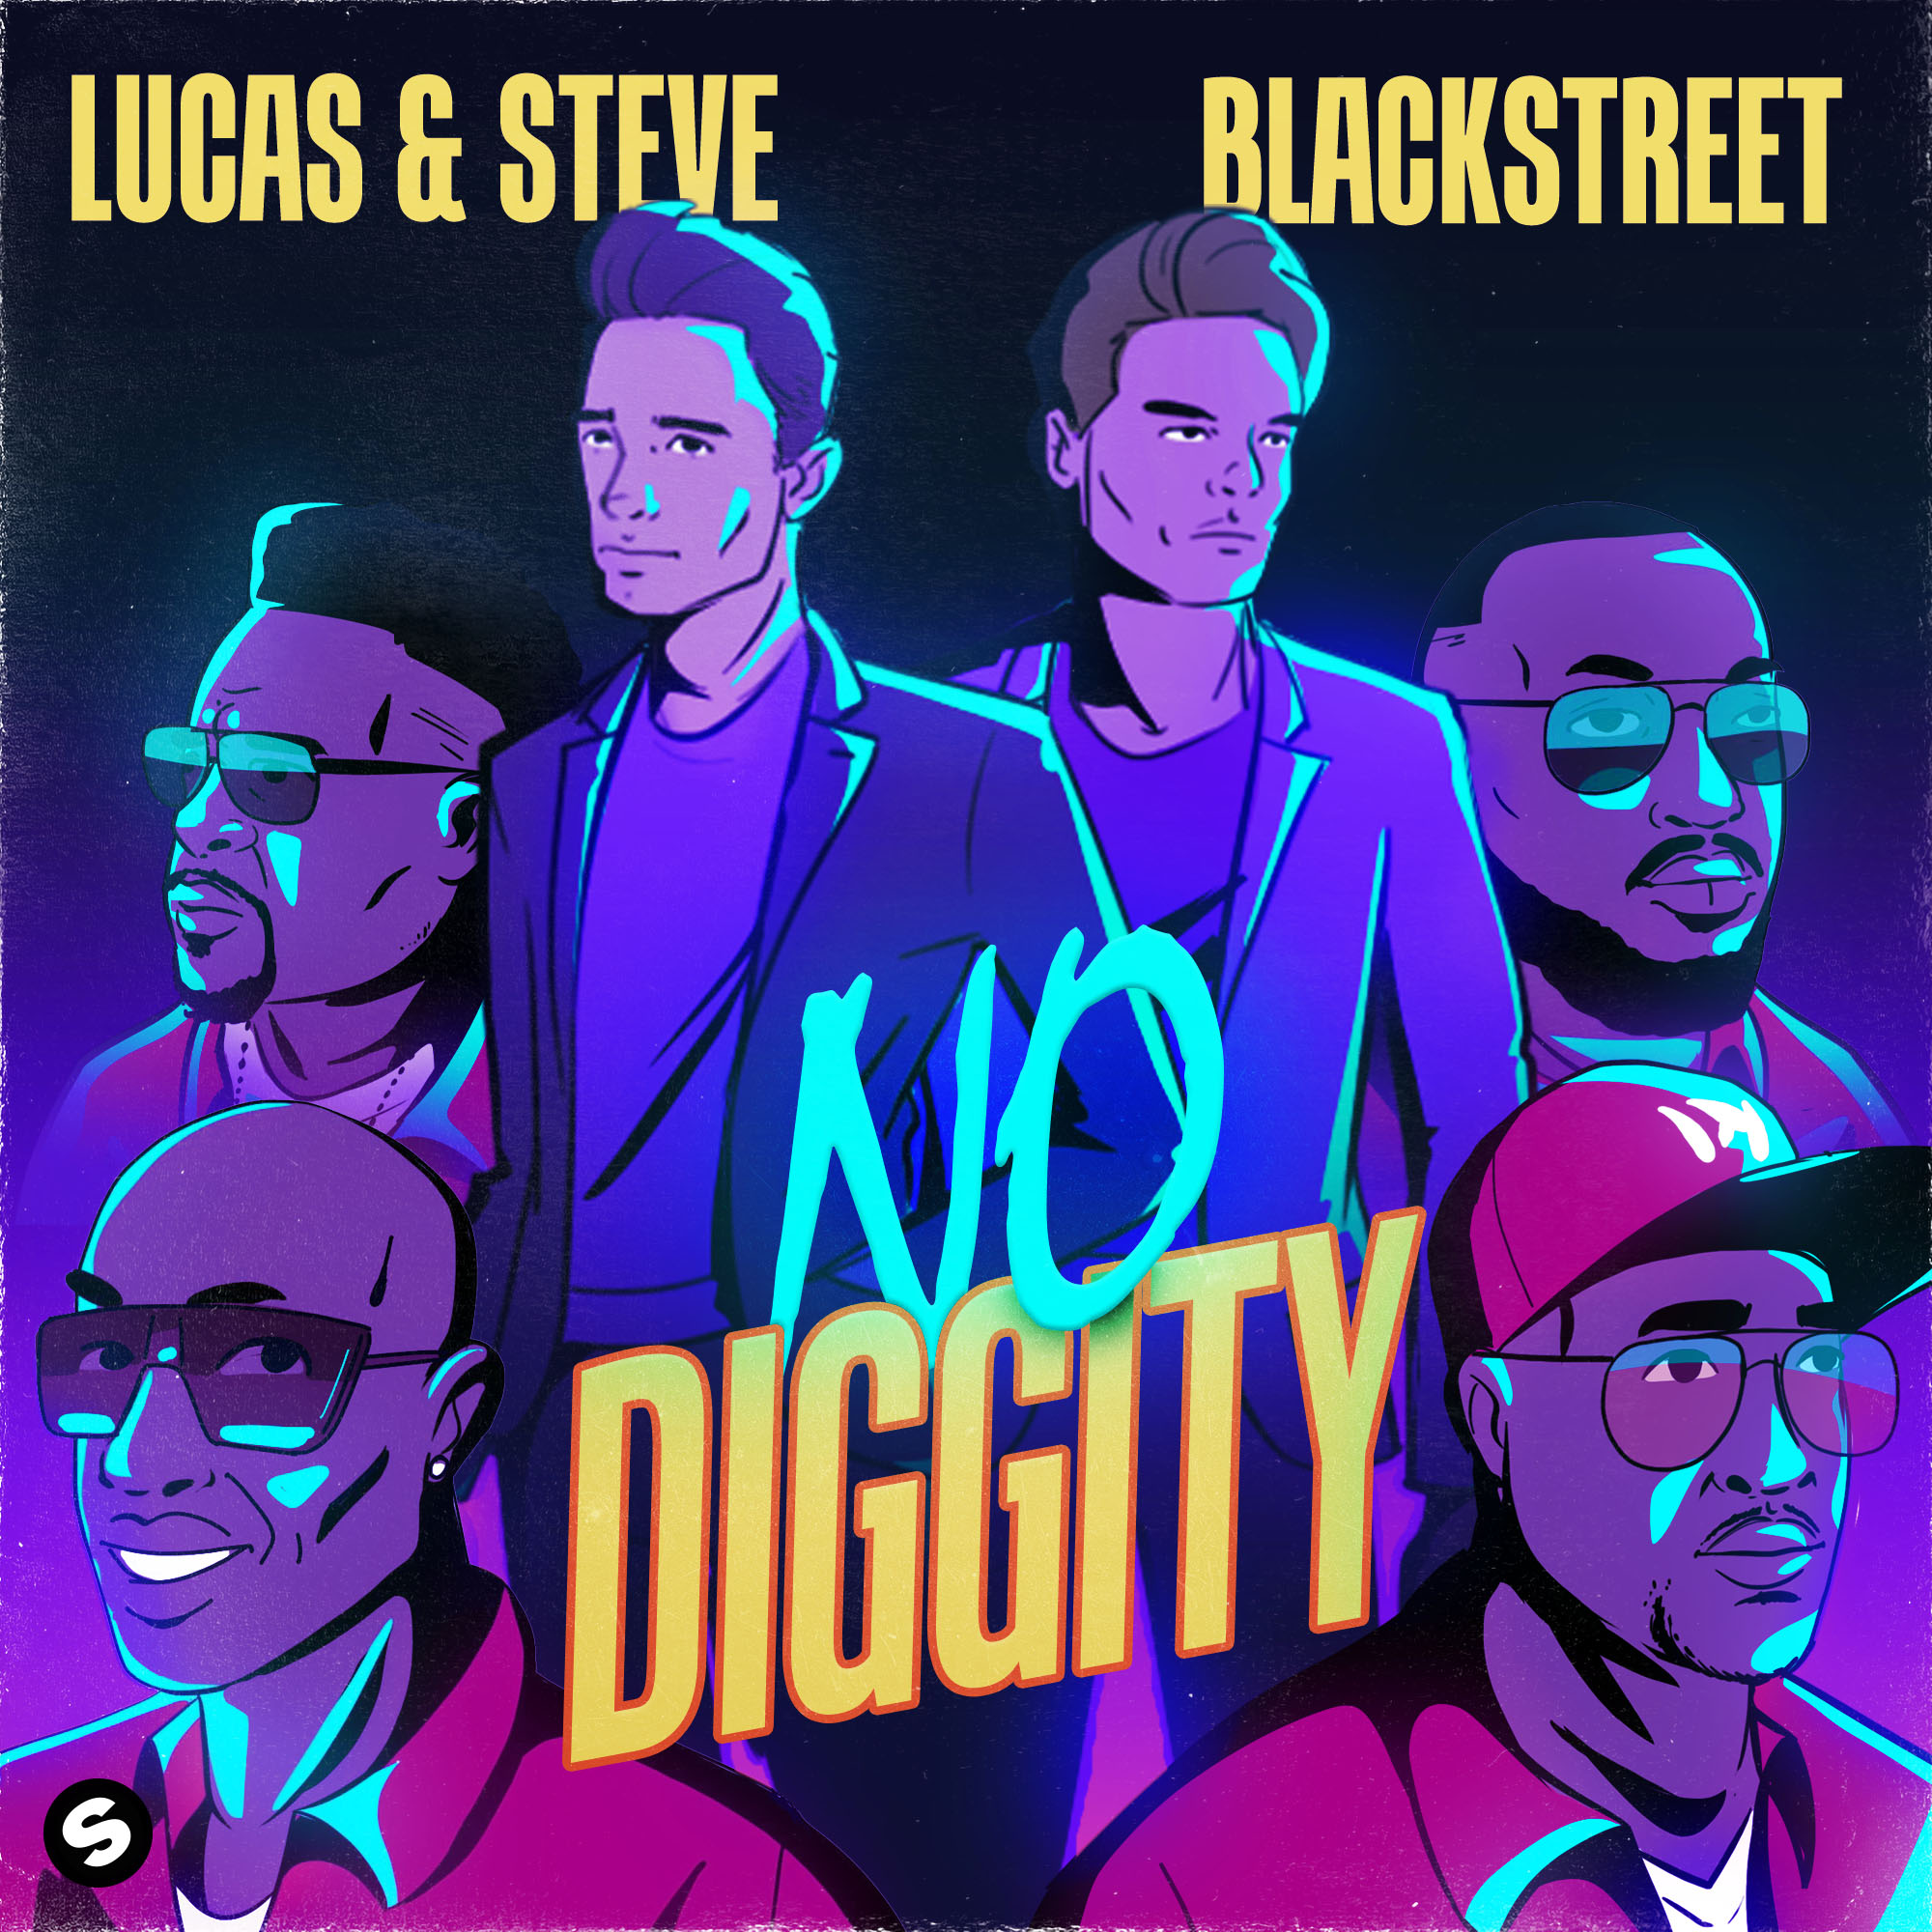 No Diggity': The Story Behind Blackstreet's Iconic Anthem